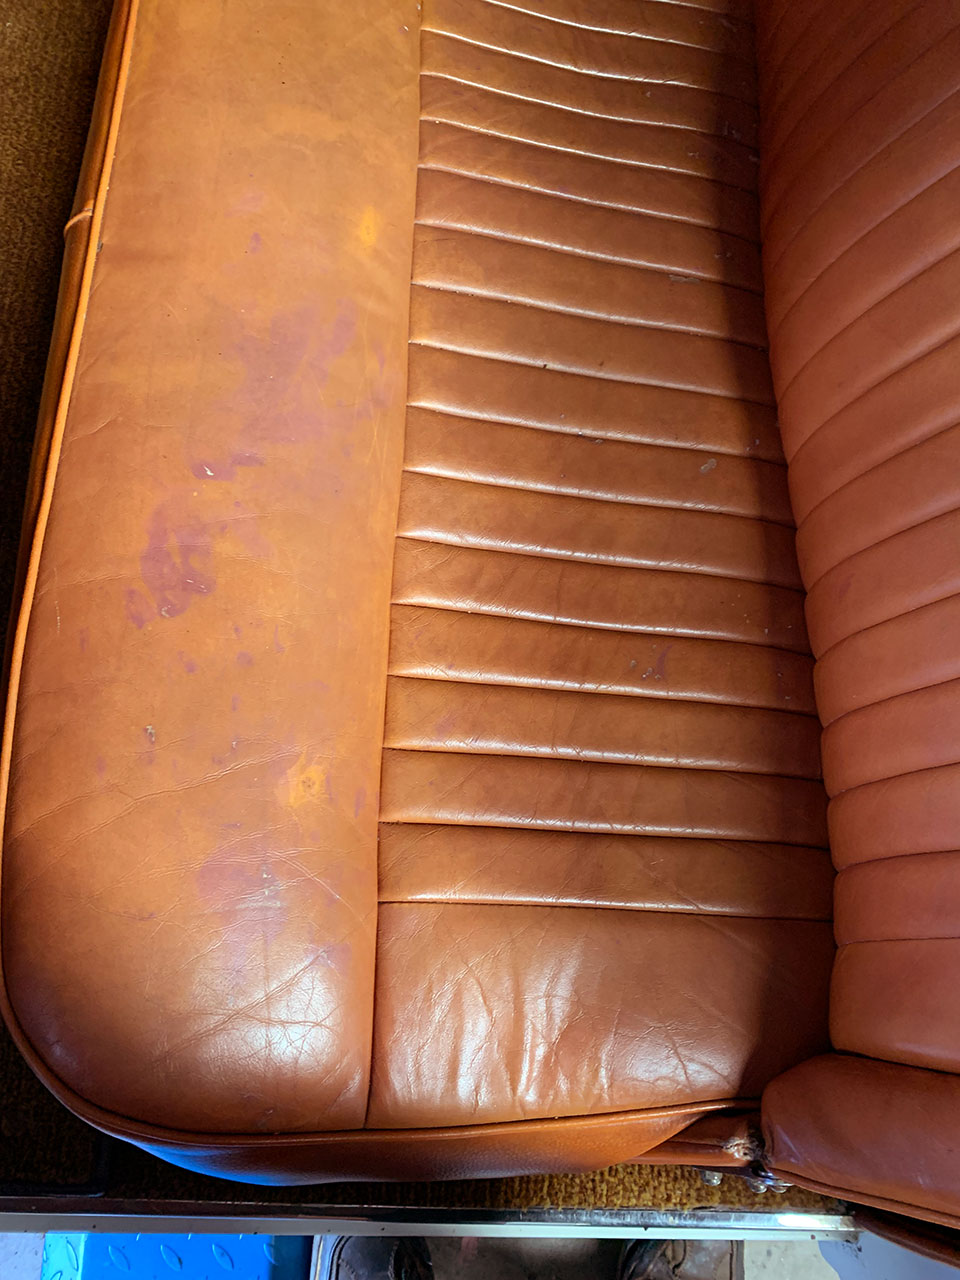 Jupiter leather seats looking stained and worn